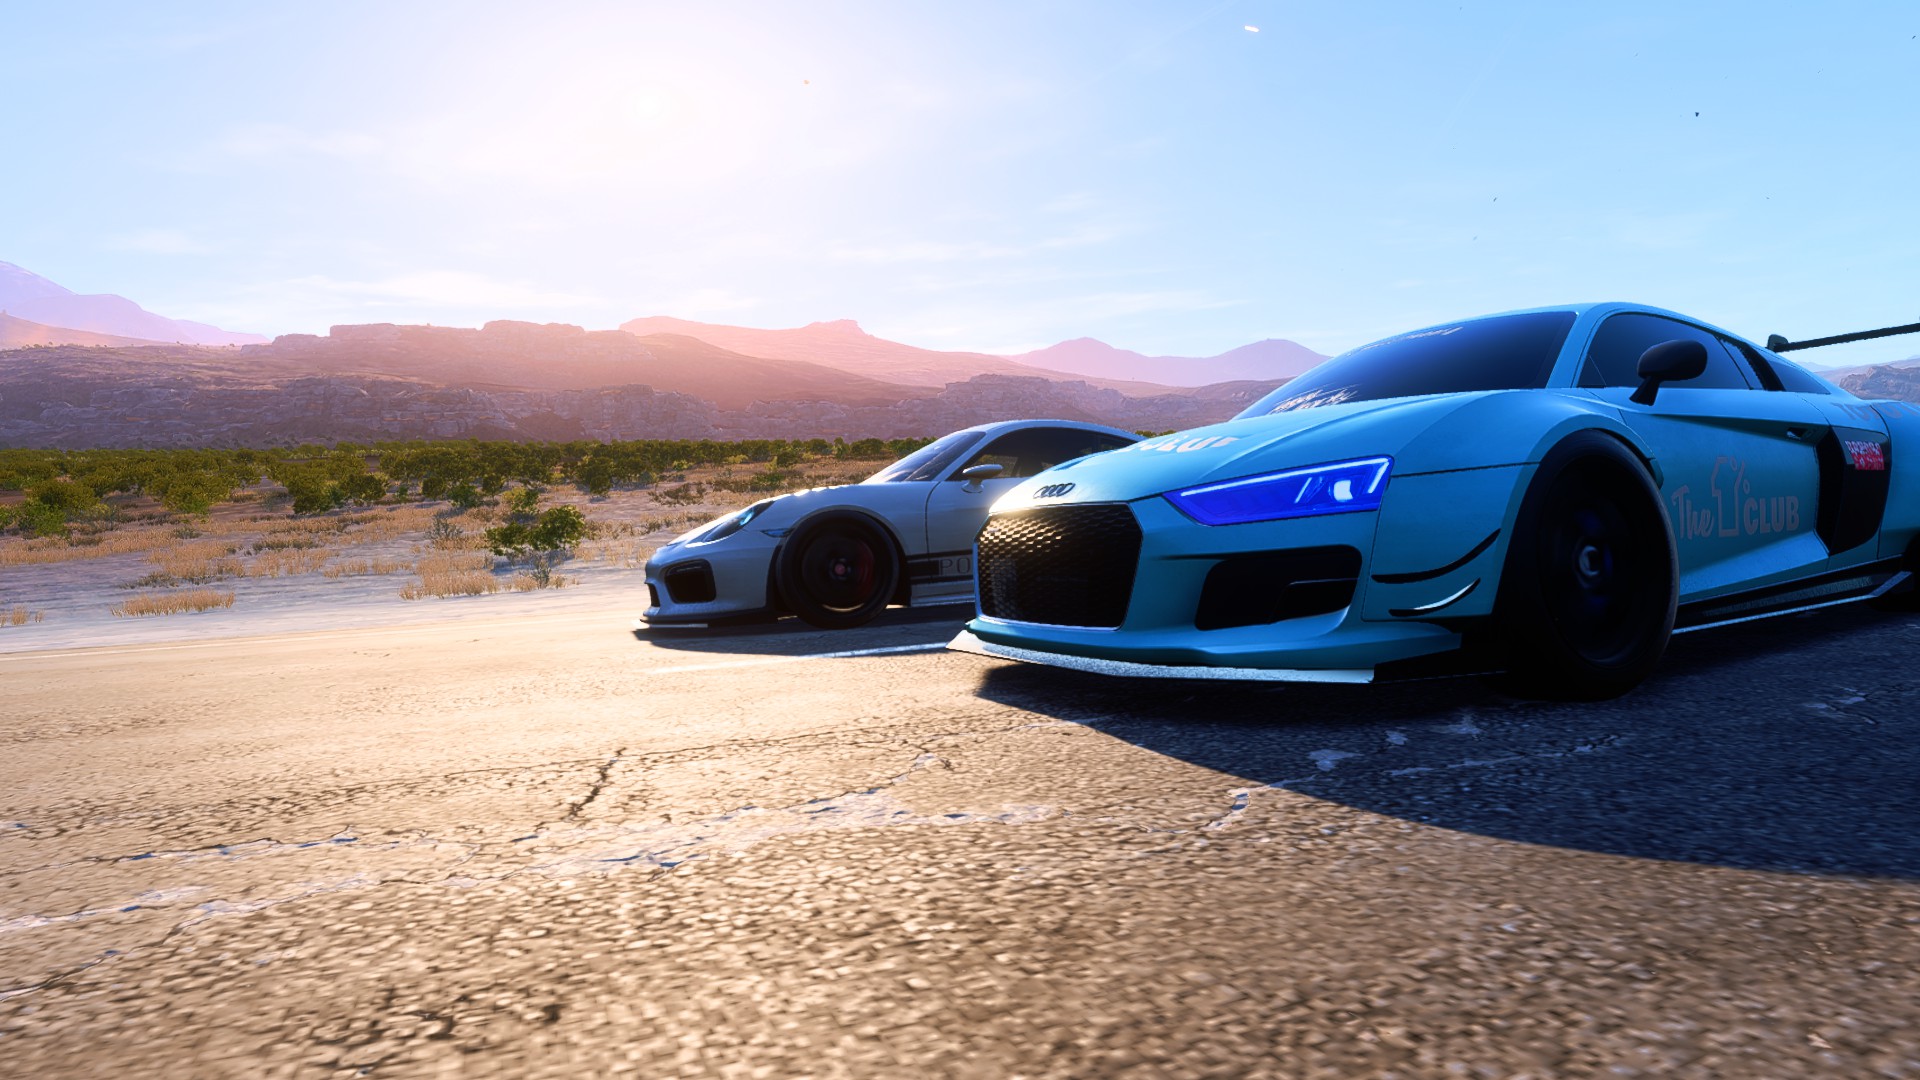 Need For Speed Need For Speed Payback Screen Shot Audi R8 Audi R8 Type 4S Porsche Audi Porsche 718 P 1920x1080